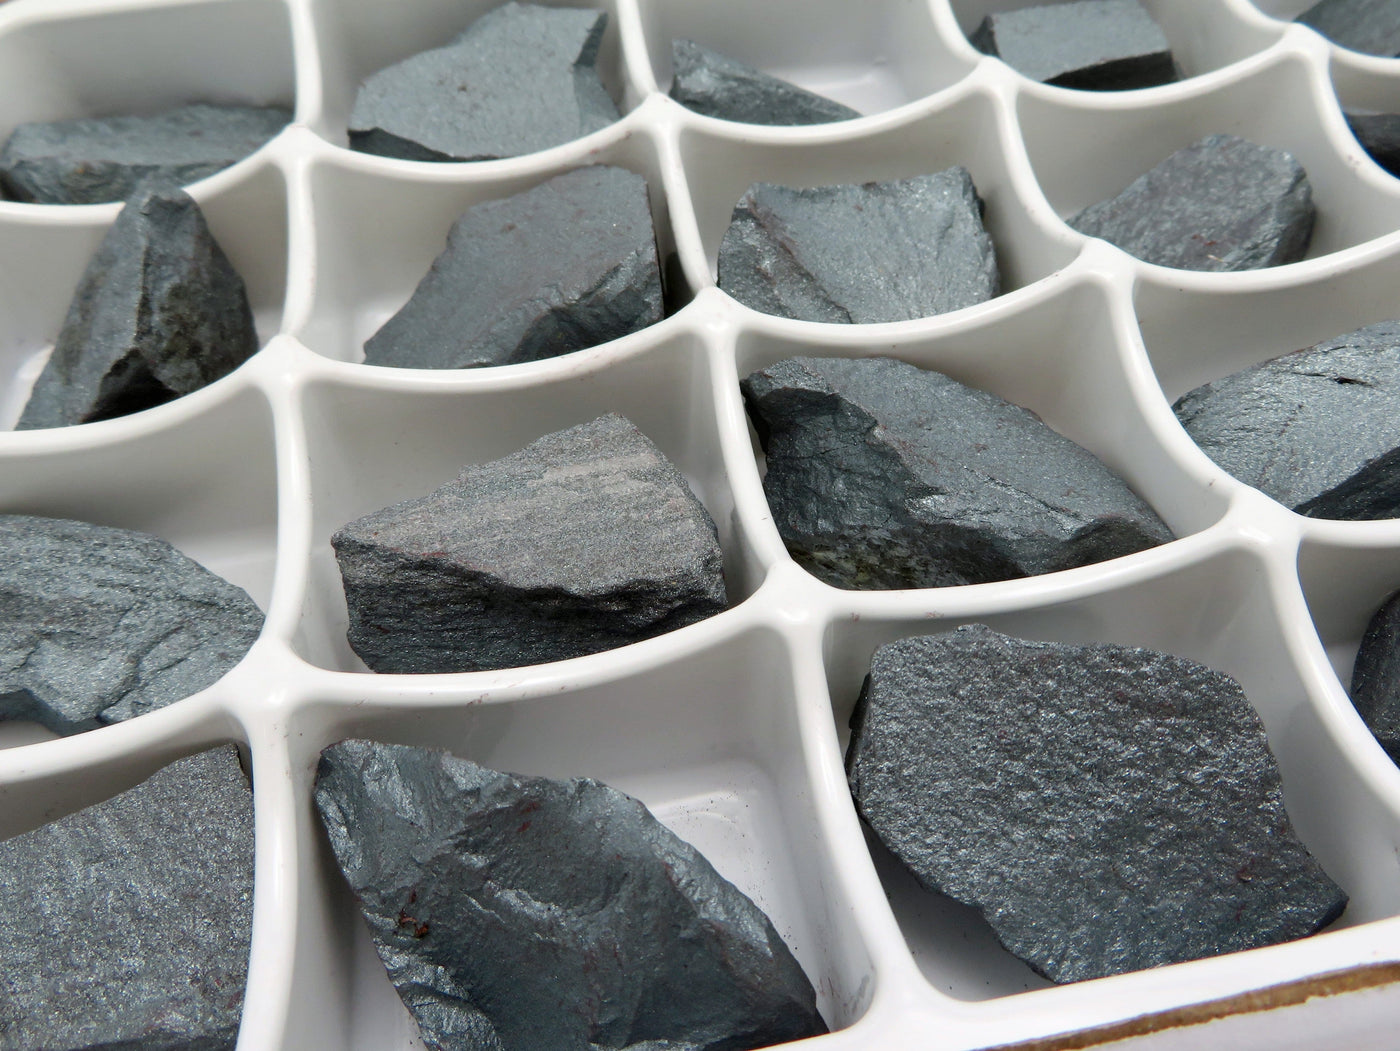 close up of hematite chunks in the box showing them at an angle to see different texture and design